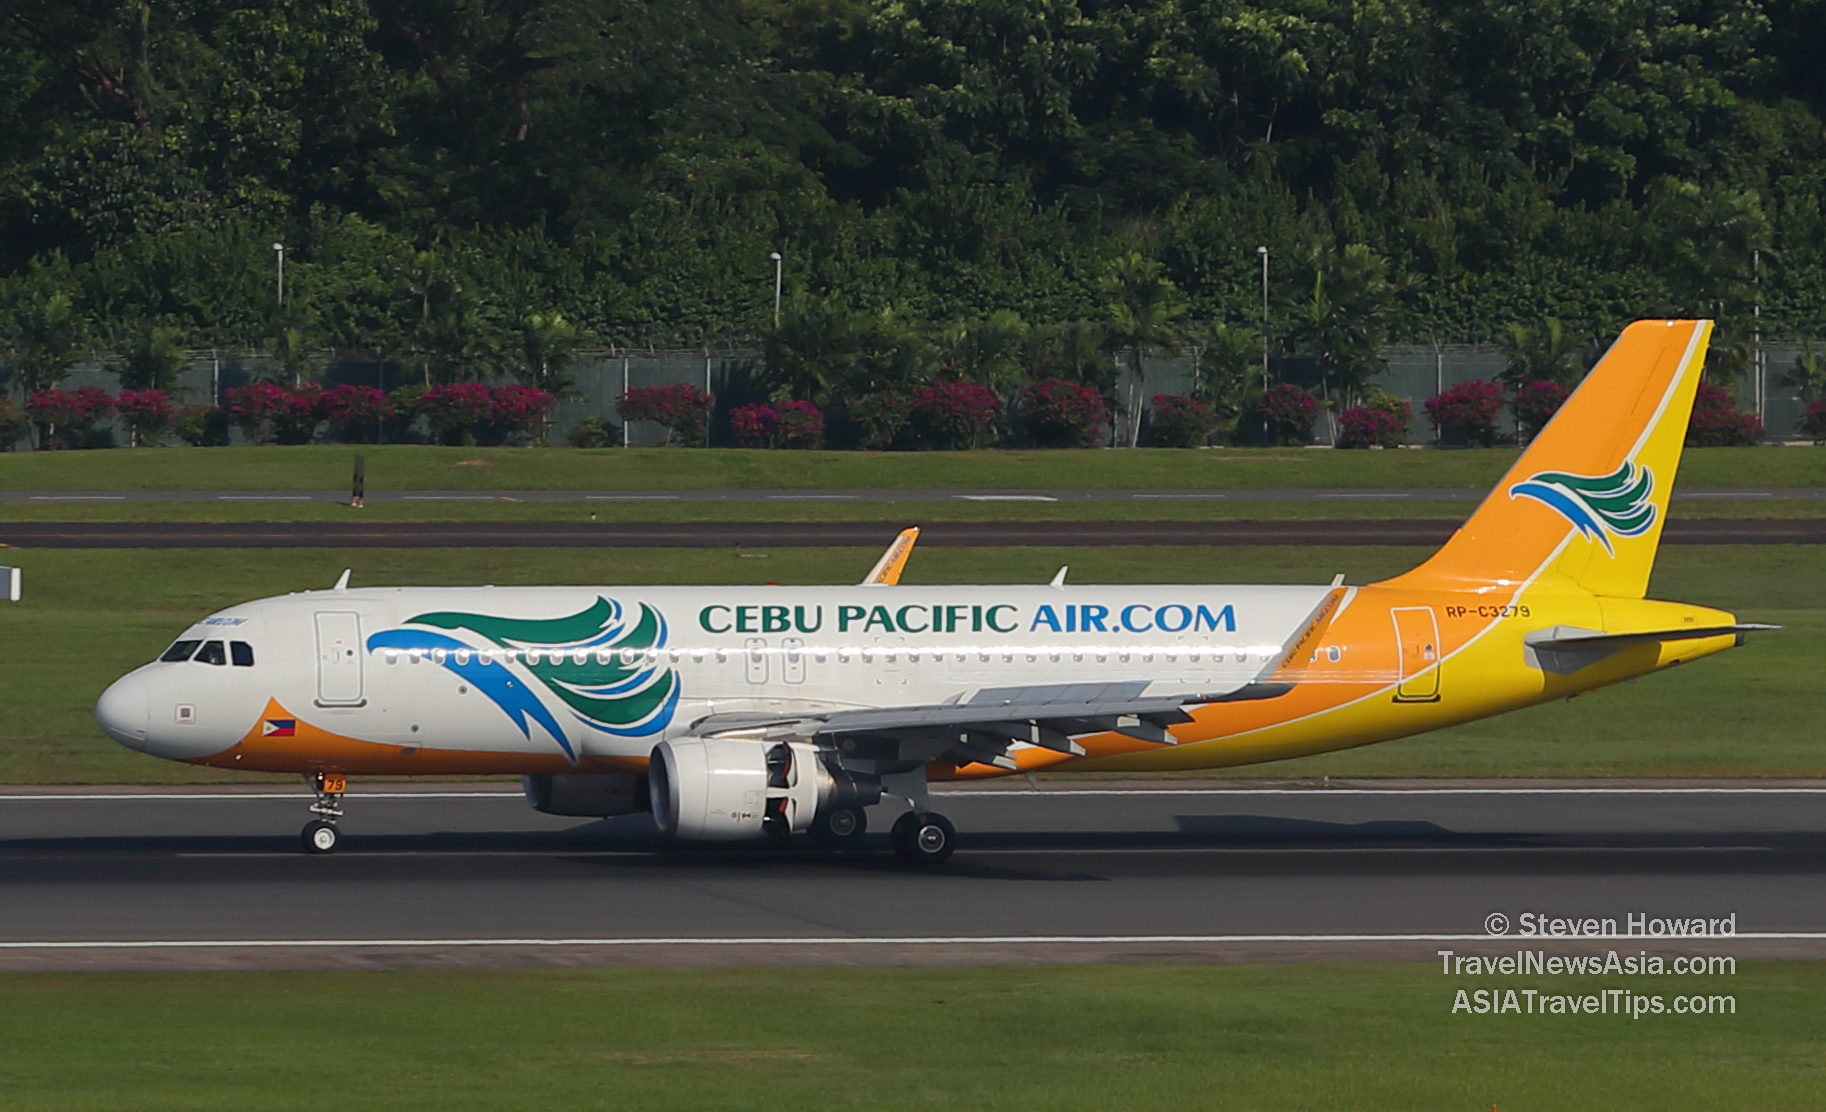 Cebu Pacific Airbus A320 reg: RP-C3279. Picture by Steven Howard of TravelNewsAsia.com Click to enlarge.